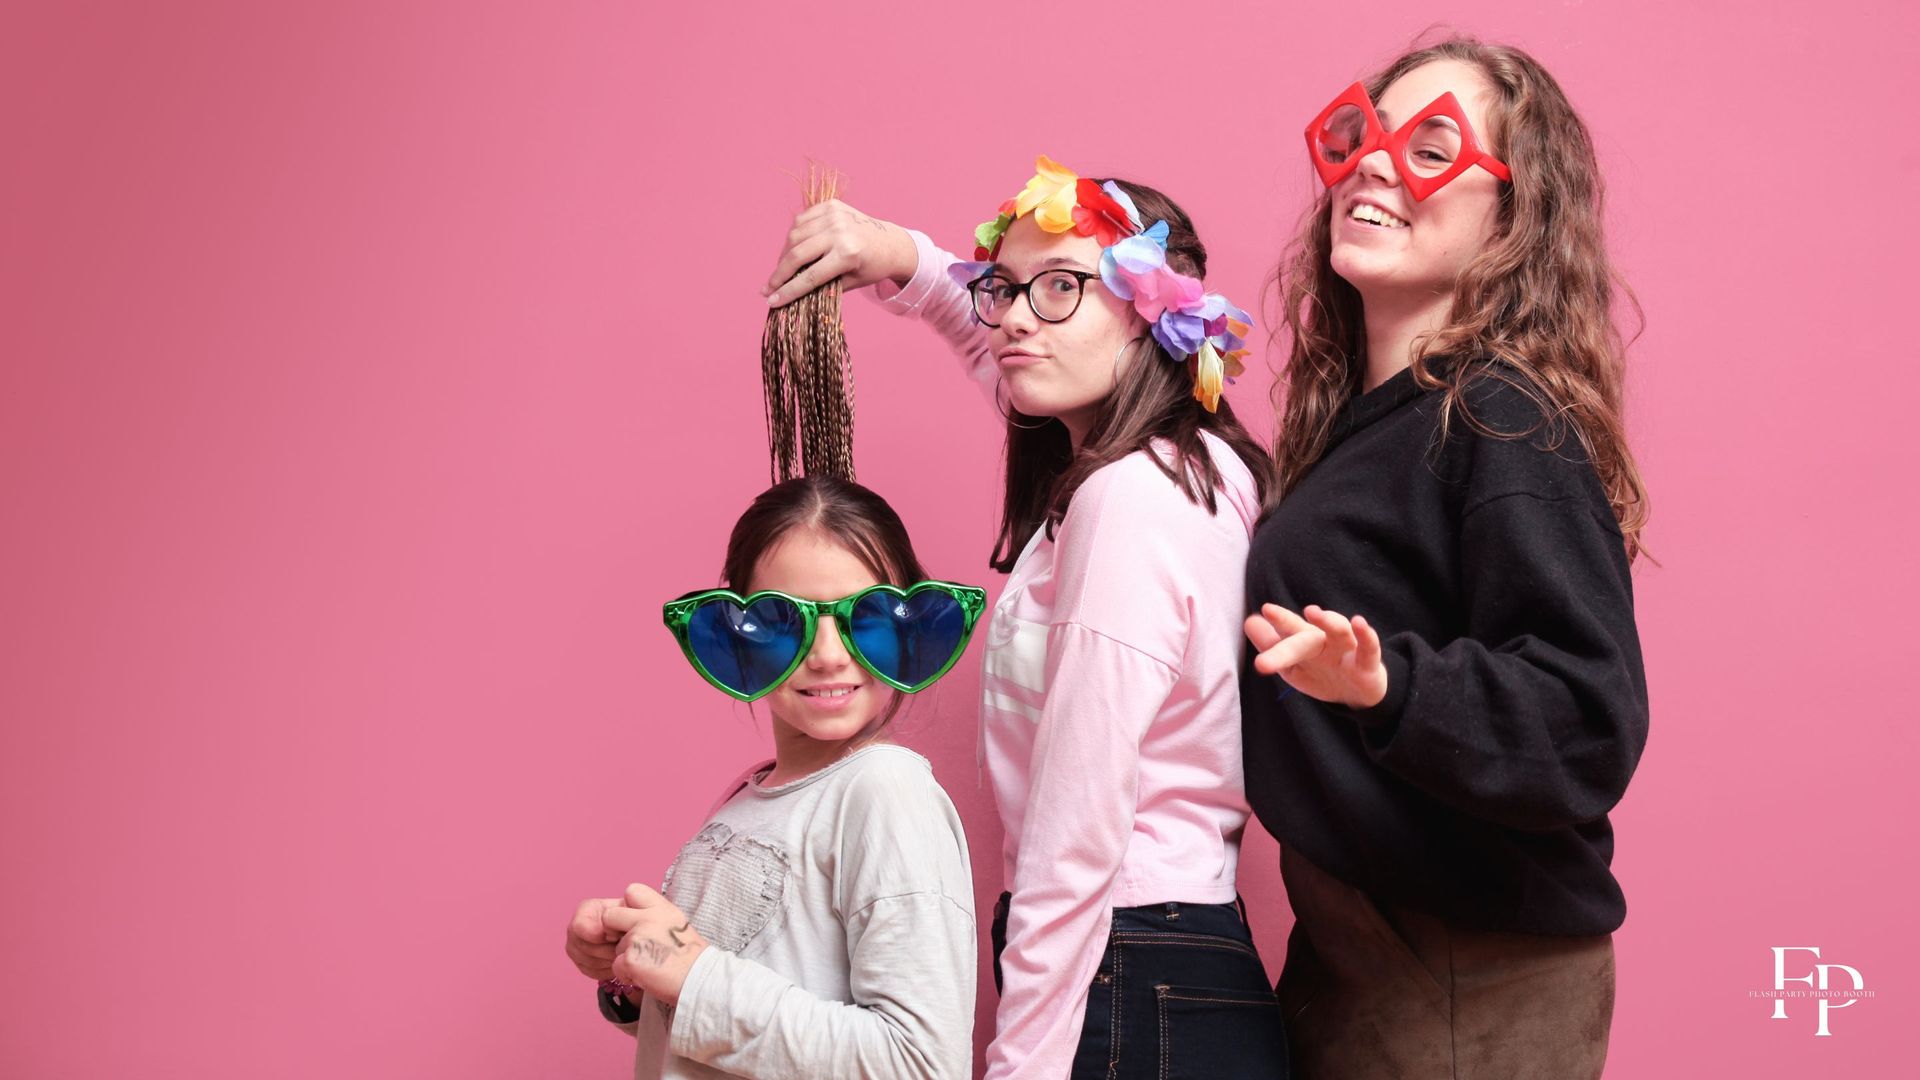 Sisters make silly poses with Flash Party's photo booth props during a birthday party.